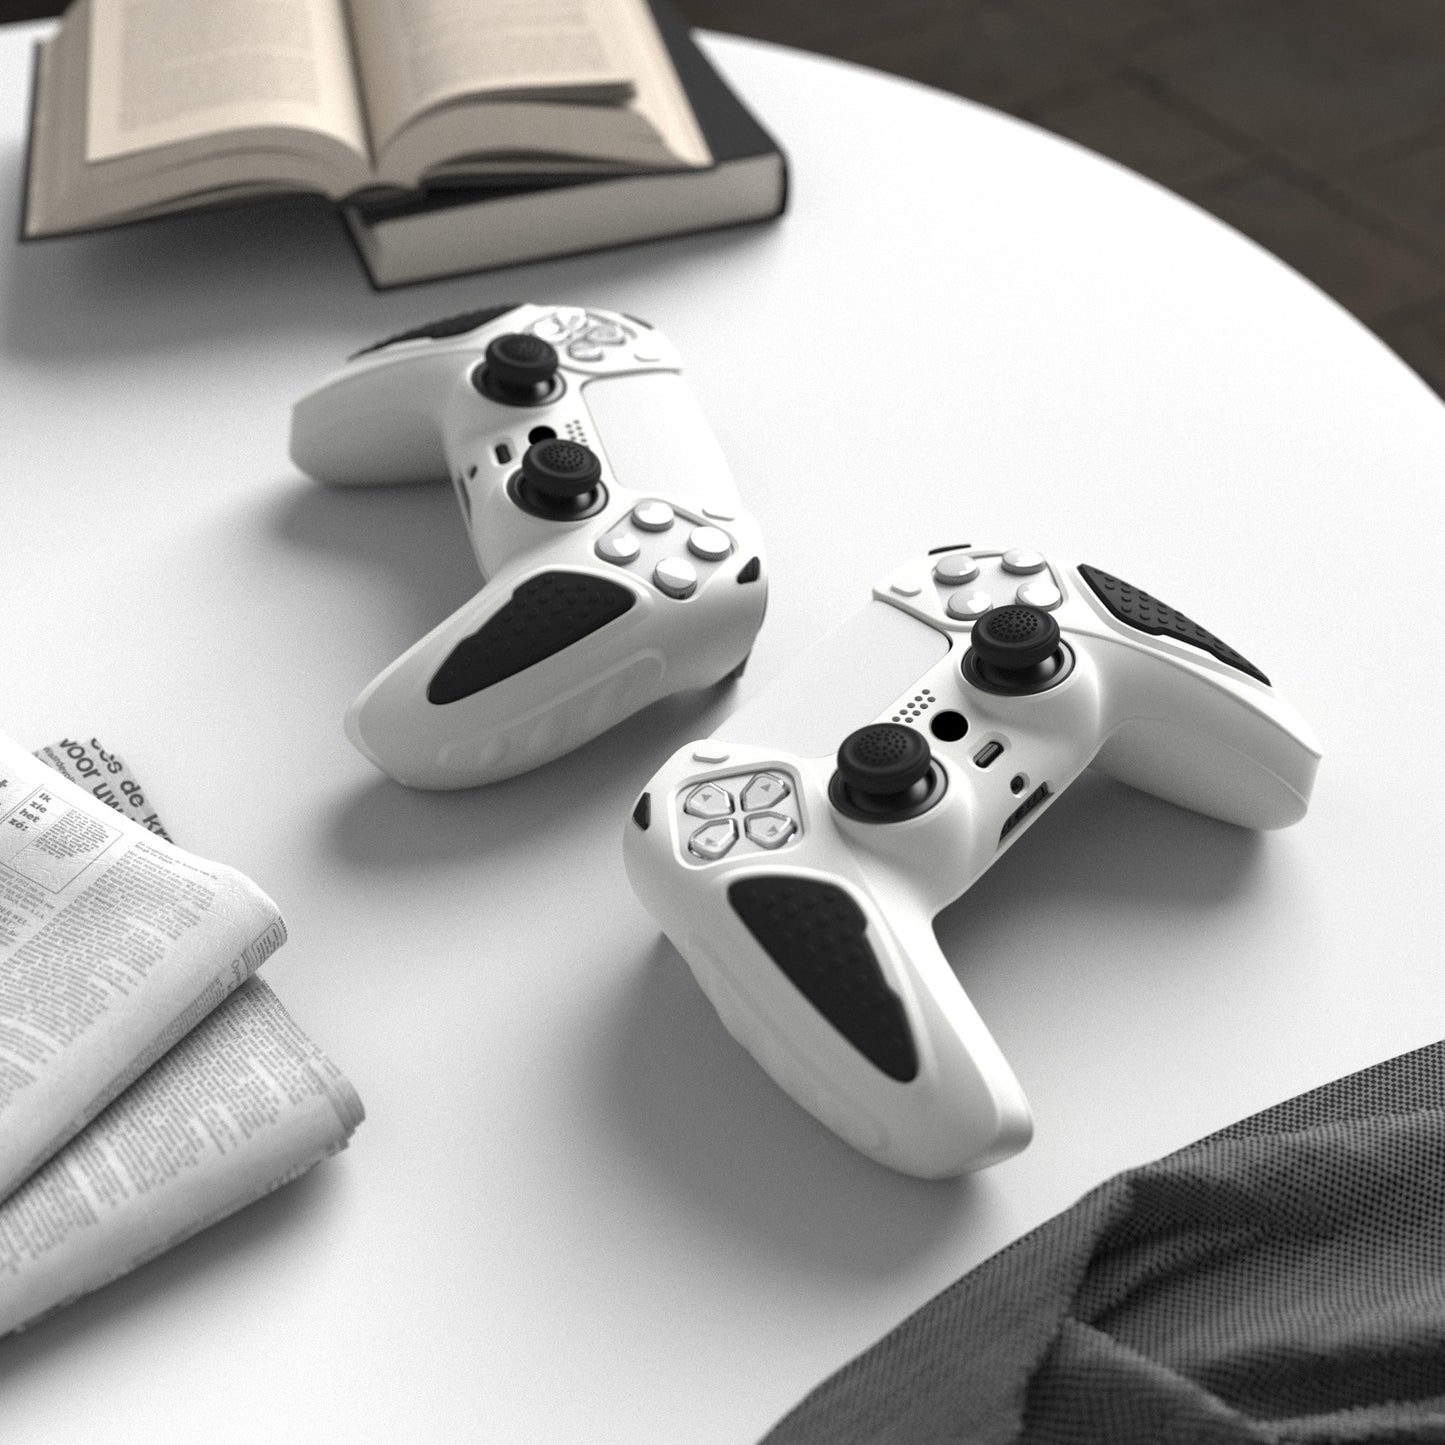 PlayVital Knight Edition Anti-Slip Silicone Cover Skin with Thumb Grip Caps for PS5 Wireless Controller - White & Black - QSPF004 PlayVital